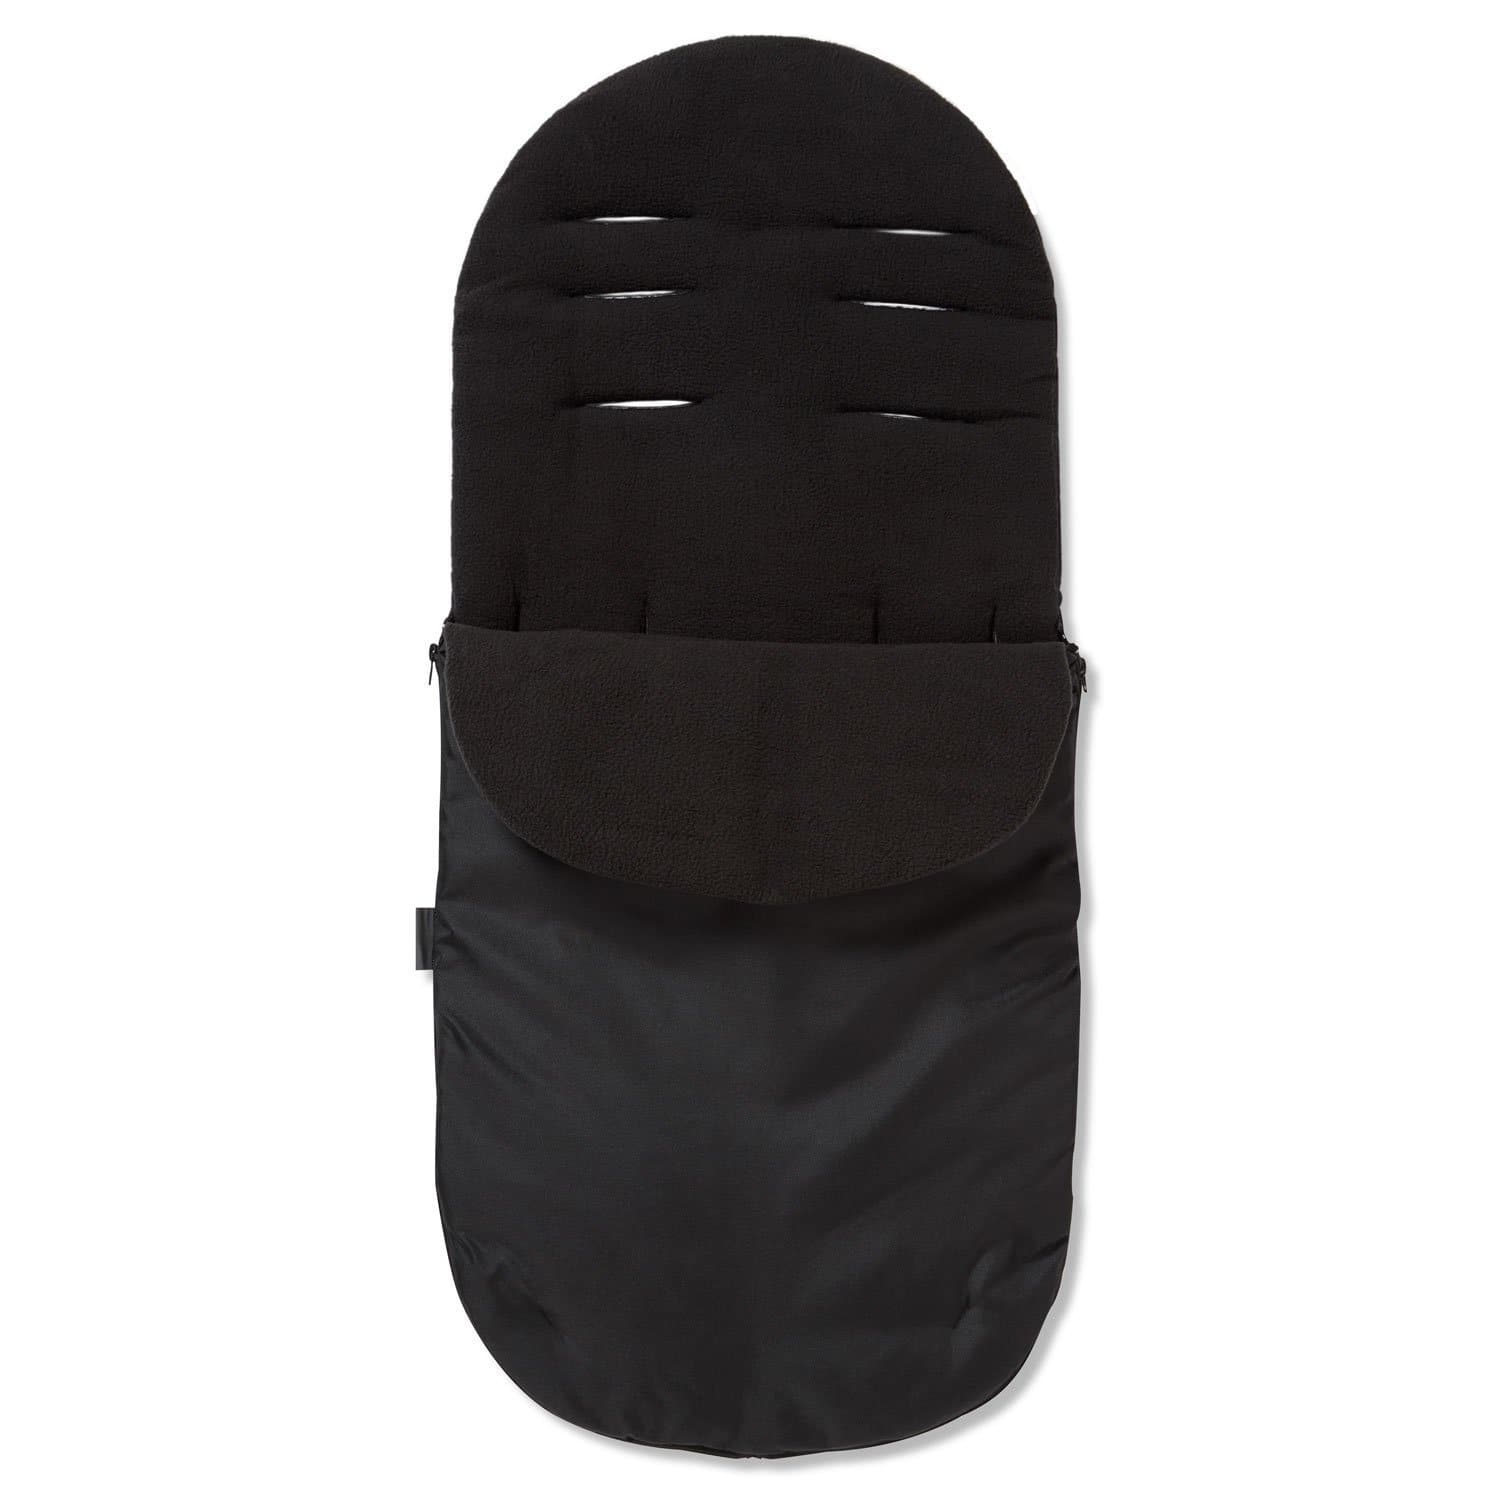 Footmuff / Cosy Toes Compatible with Emmaljunga - Black / Fits All Models | For Your Little One